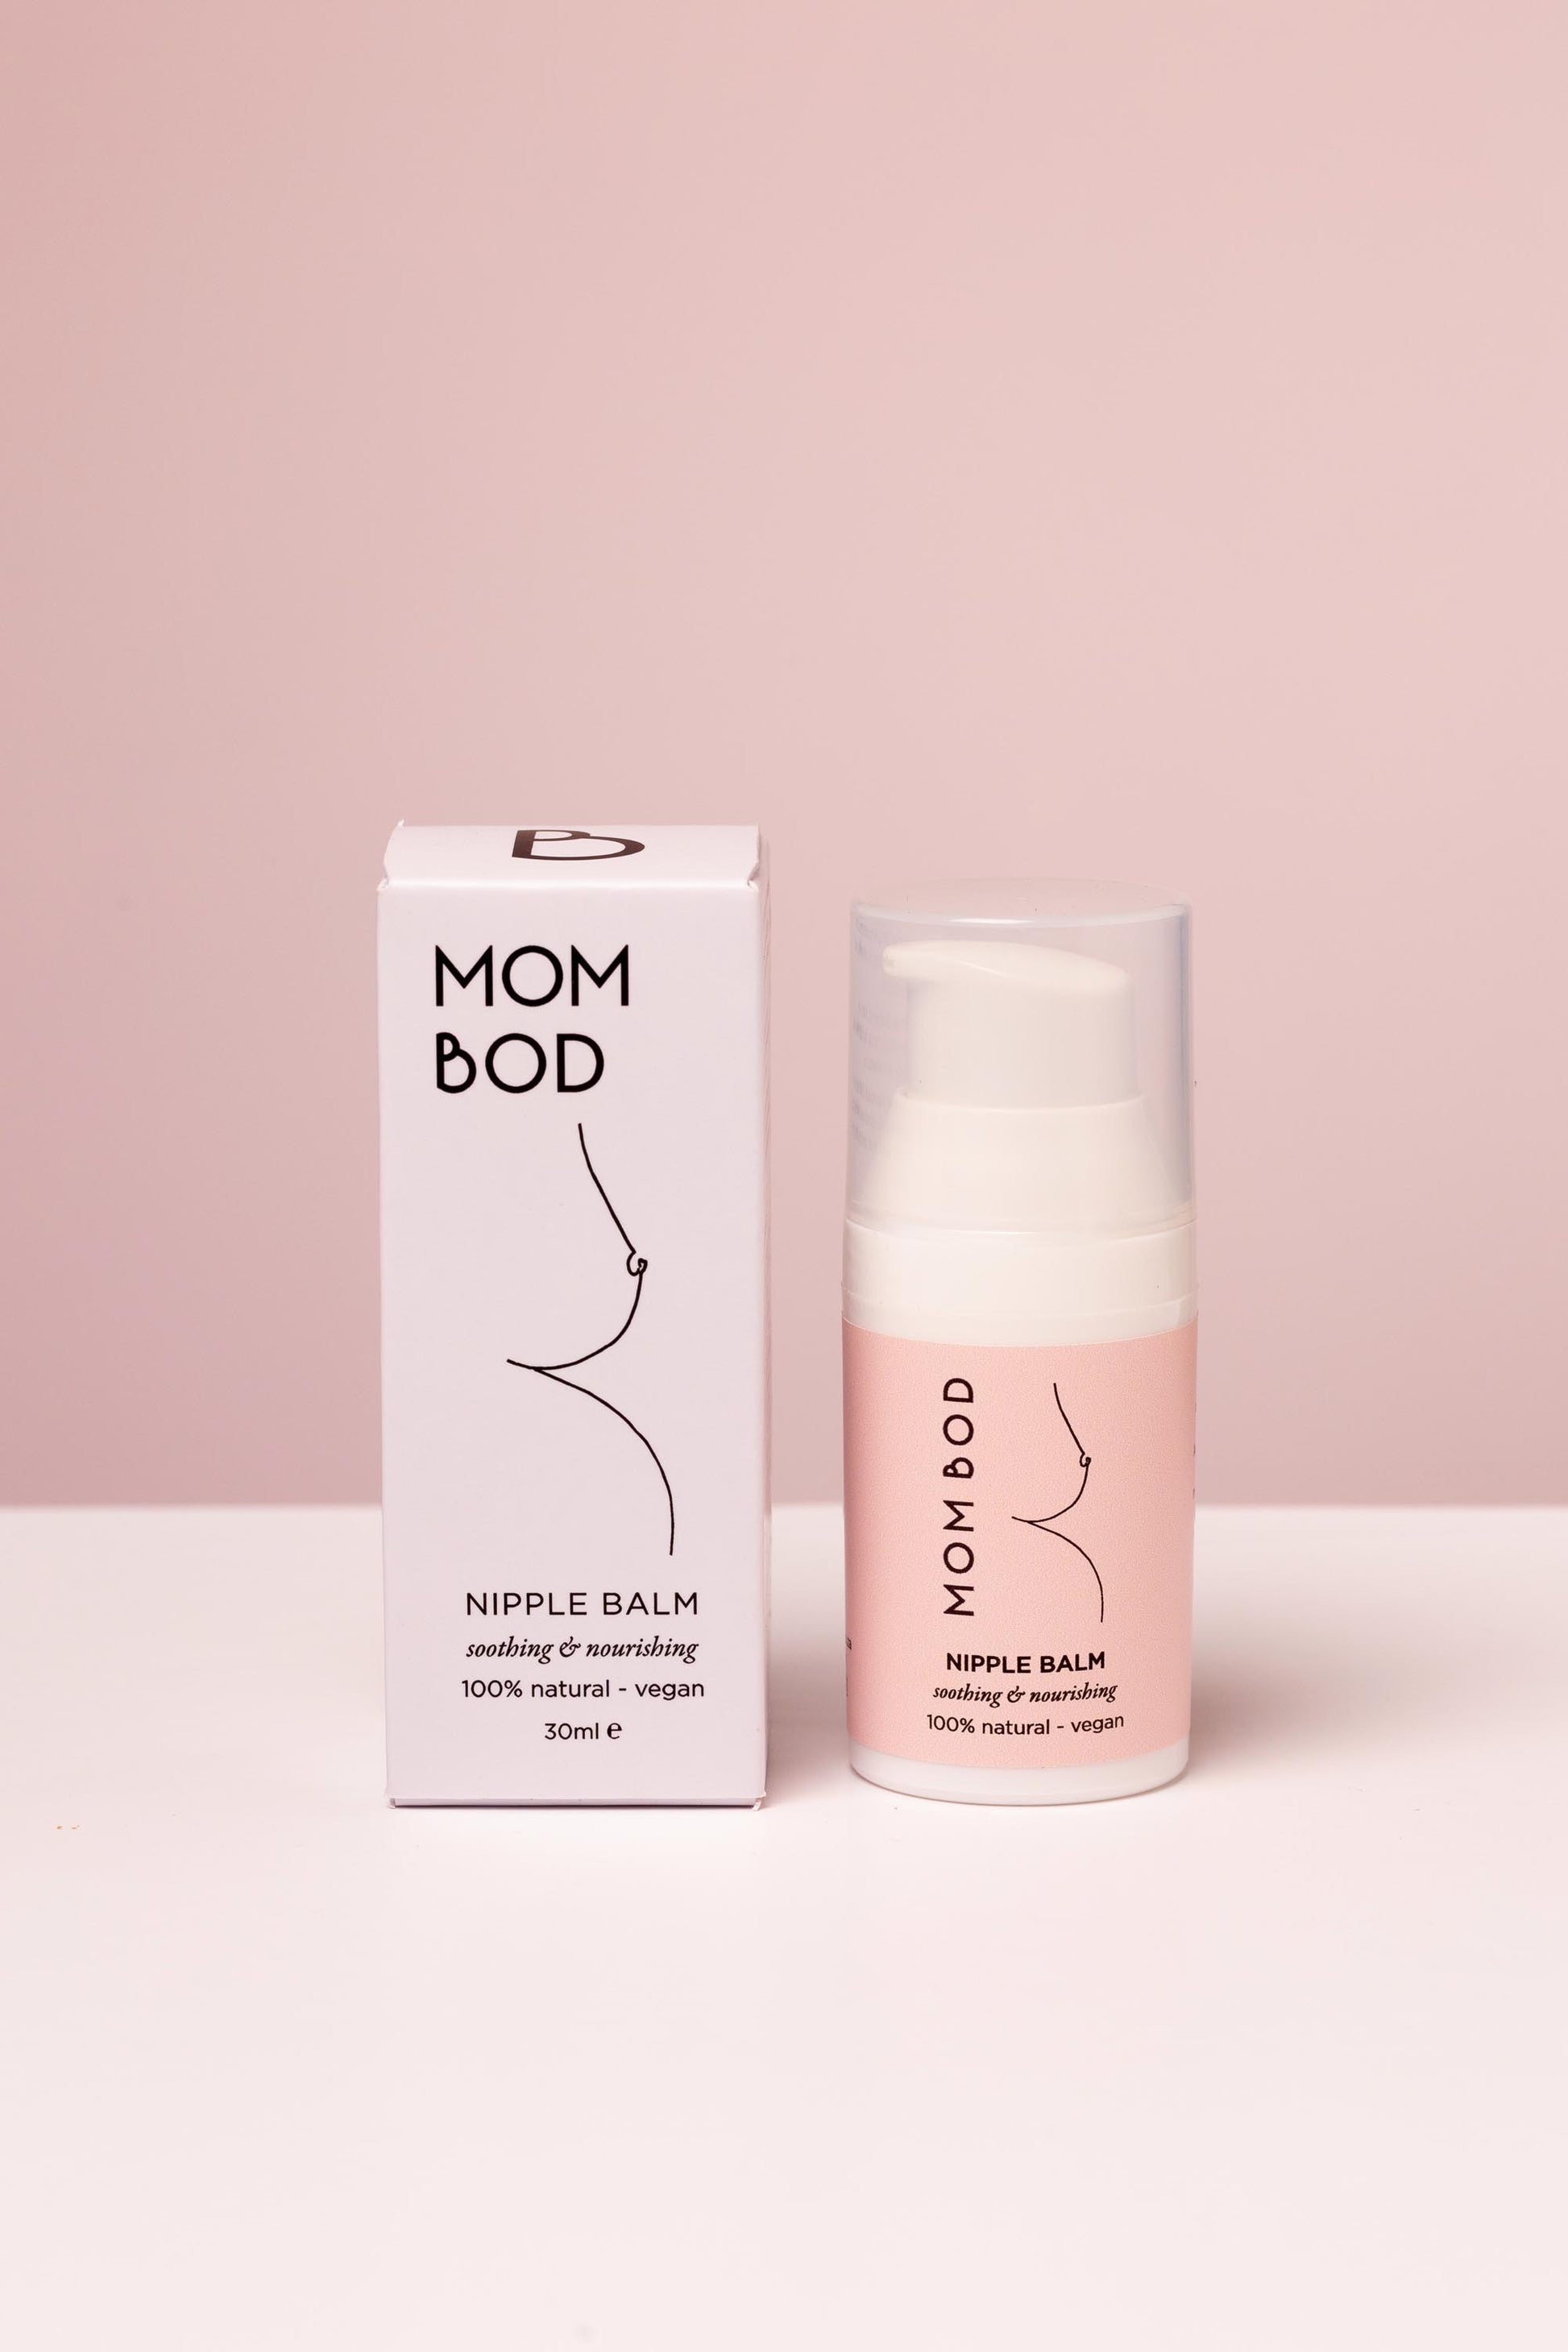 Mom Bod Nipple Balm provides fast relief and protection from sore